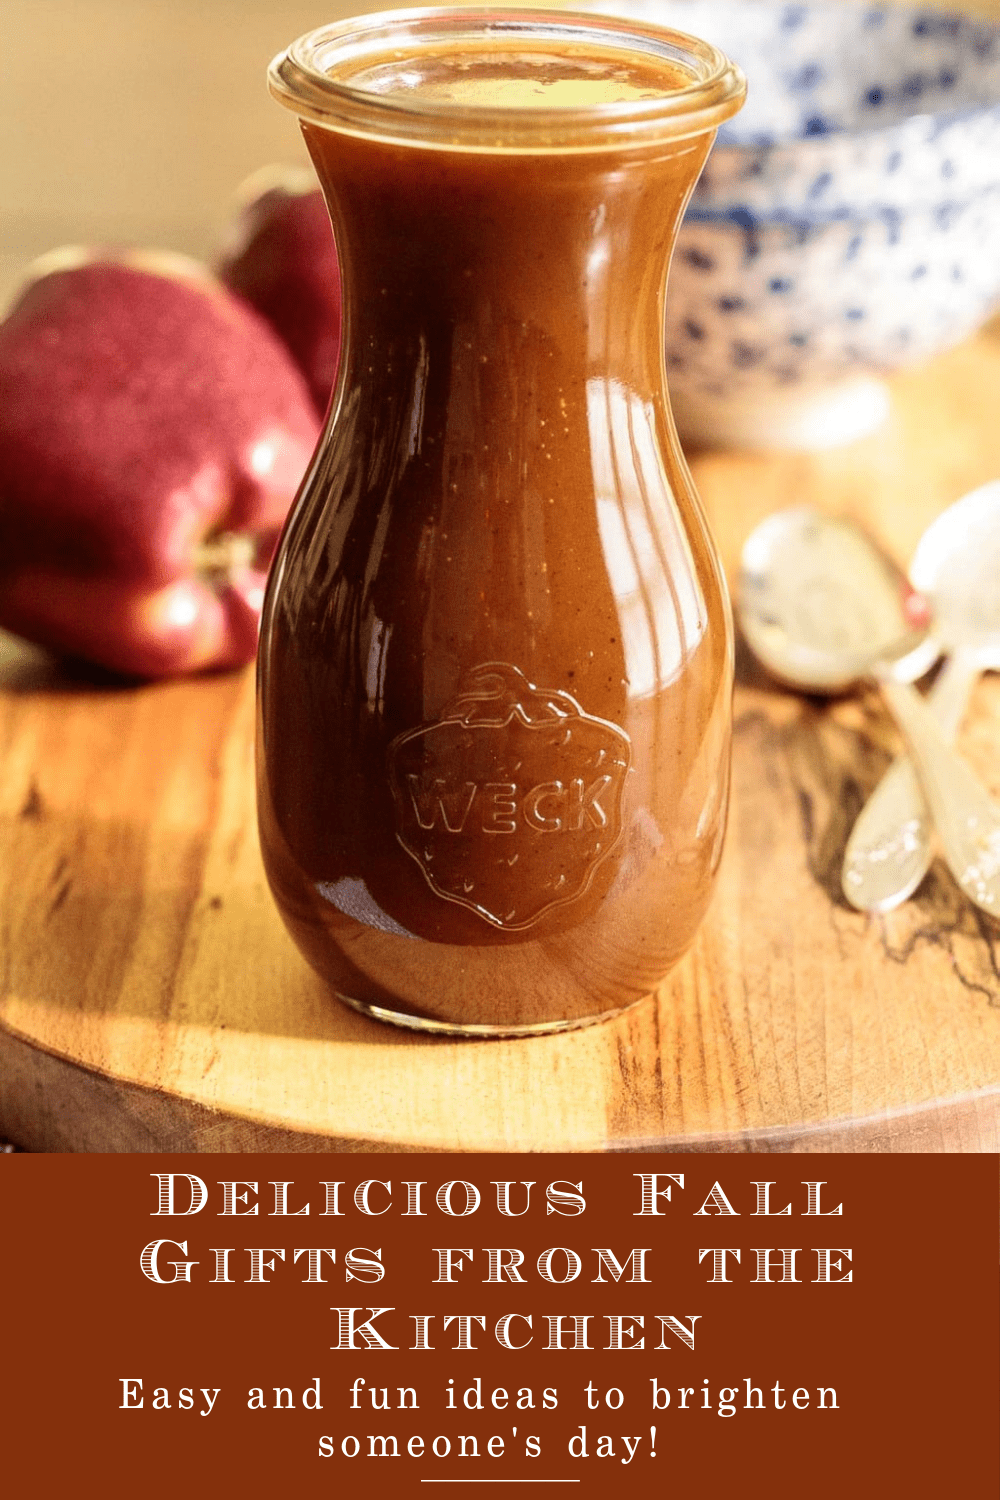 Delicious Fall Gifts from the Kitchen